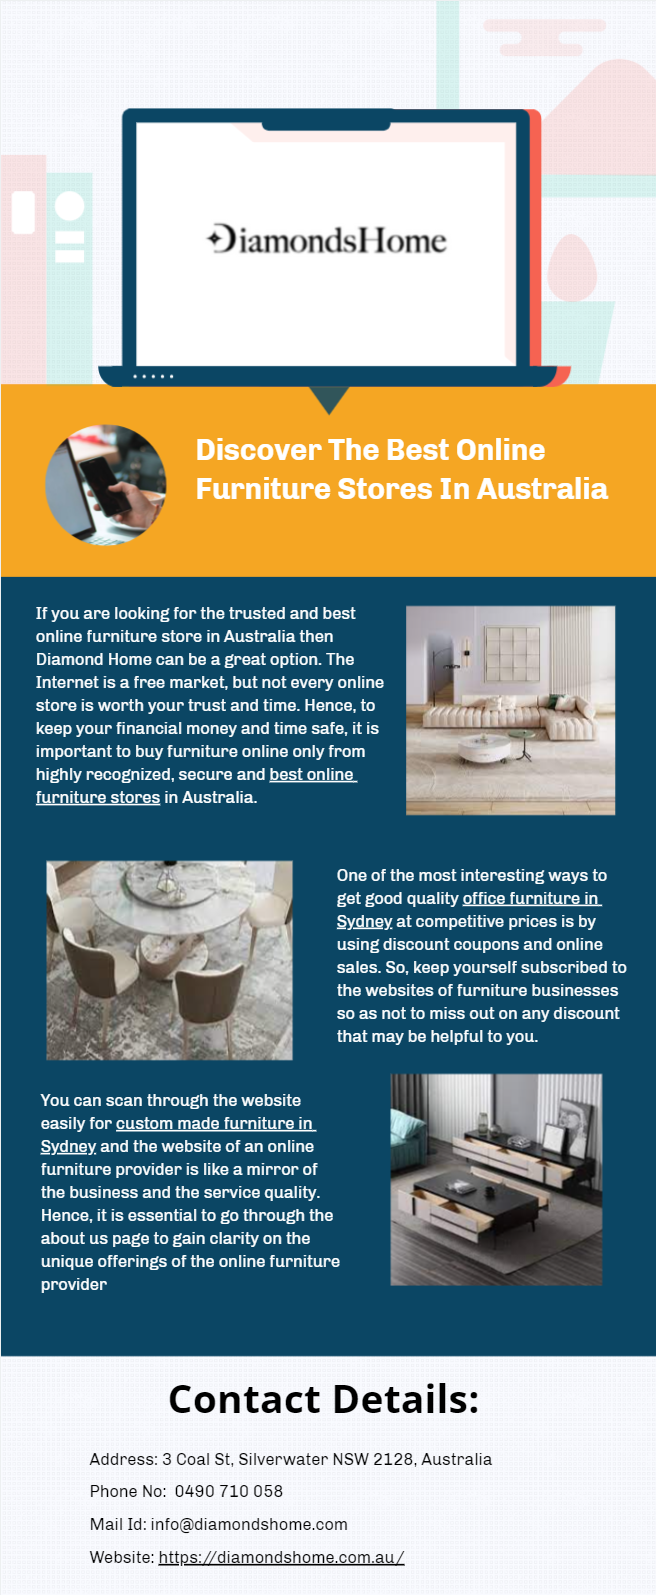 Discover The Best Online Furniture Stores In Australia